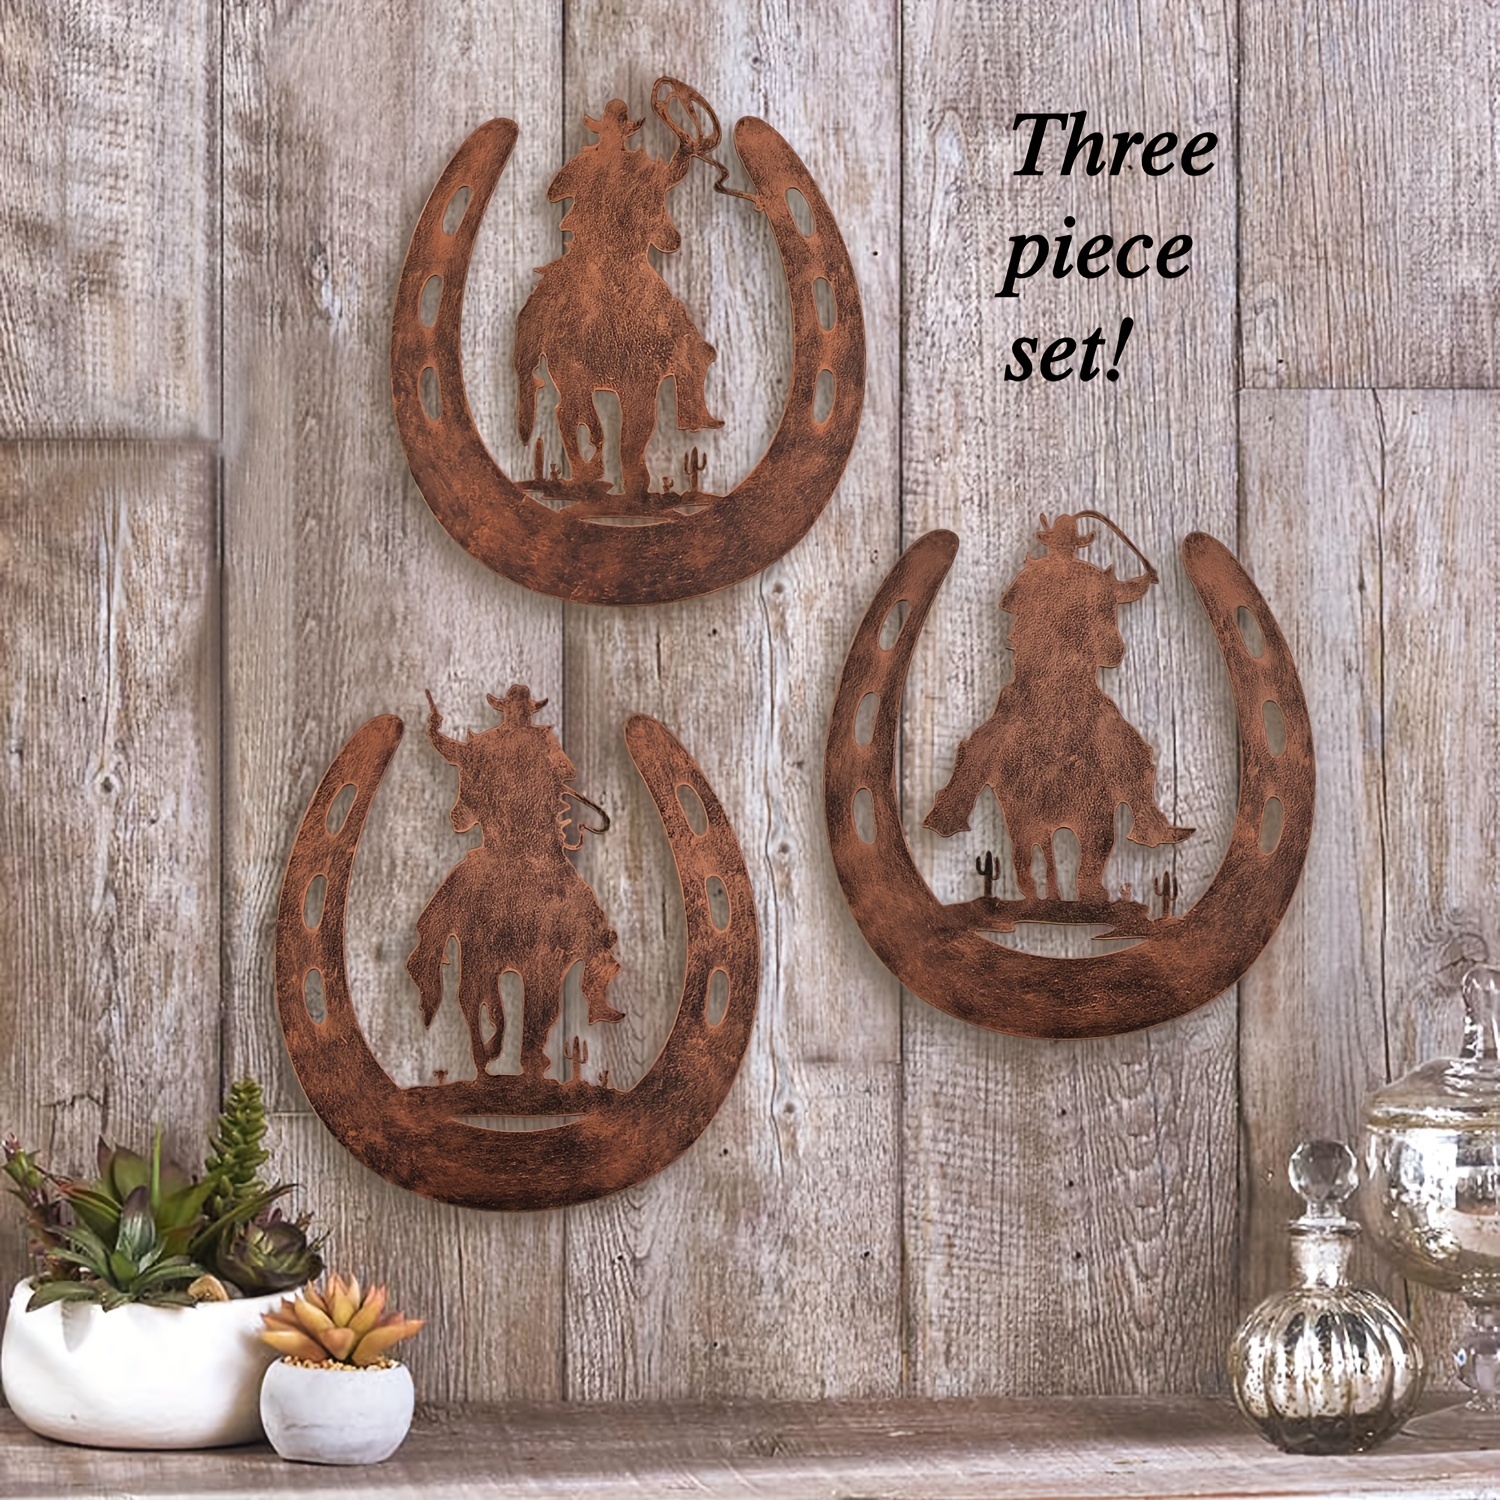  Pinkunn 4 Pcs Wooden Western Horseshoe Wall Decor Cowboy  Western Rustic Decoration 9.8 x 9 Inches Horse Shoes Christmas Decoration  Hanging for Home Bedroom Bathroom Indoor Outdoor(Bronze) : Home & Kitchen